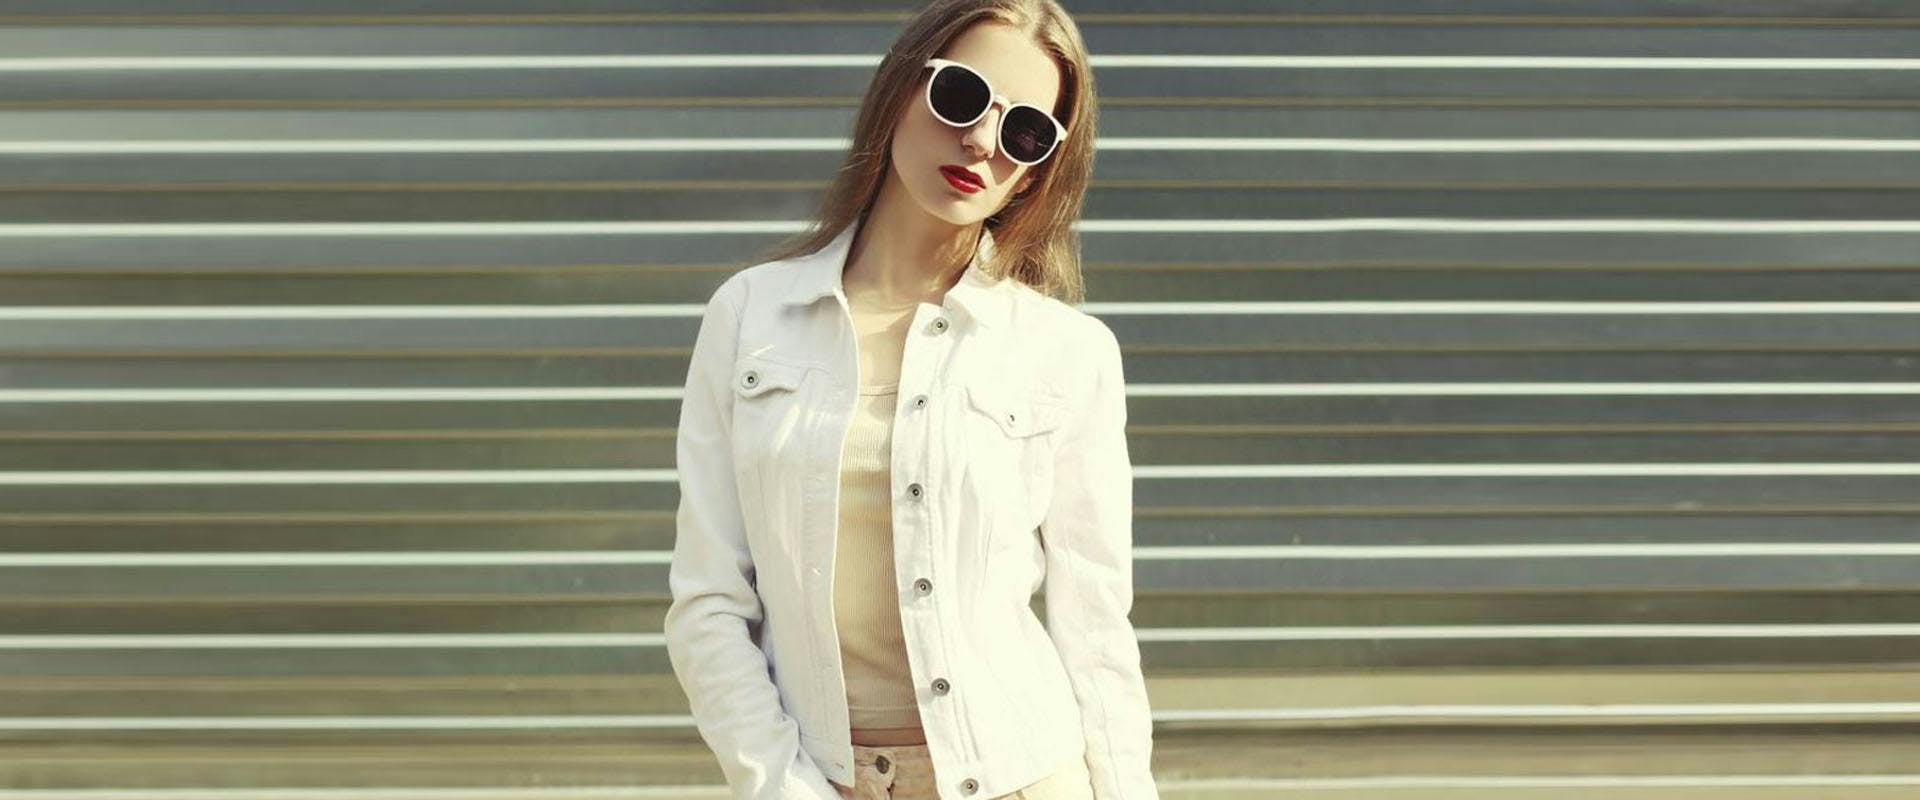 sunglasses accessories accessory clothing apparel person human sleeve female